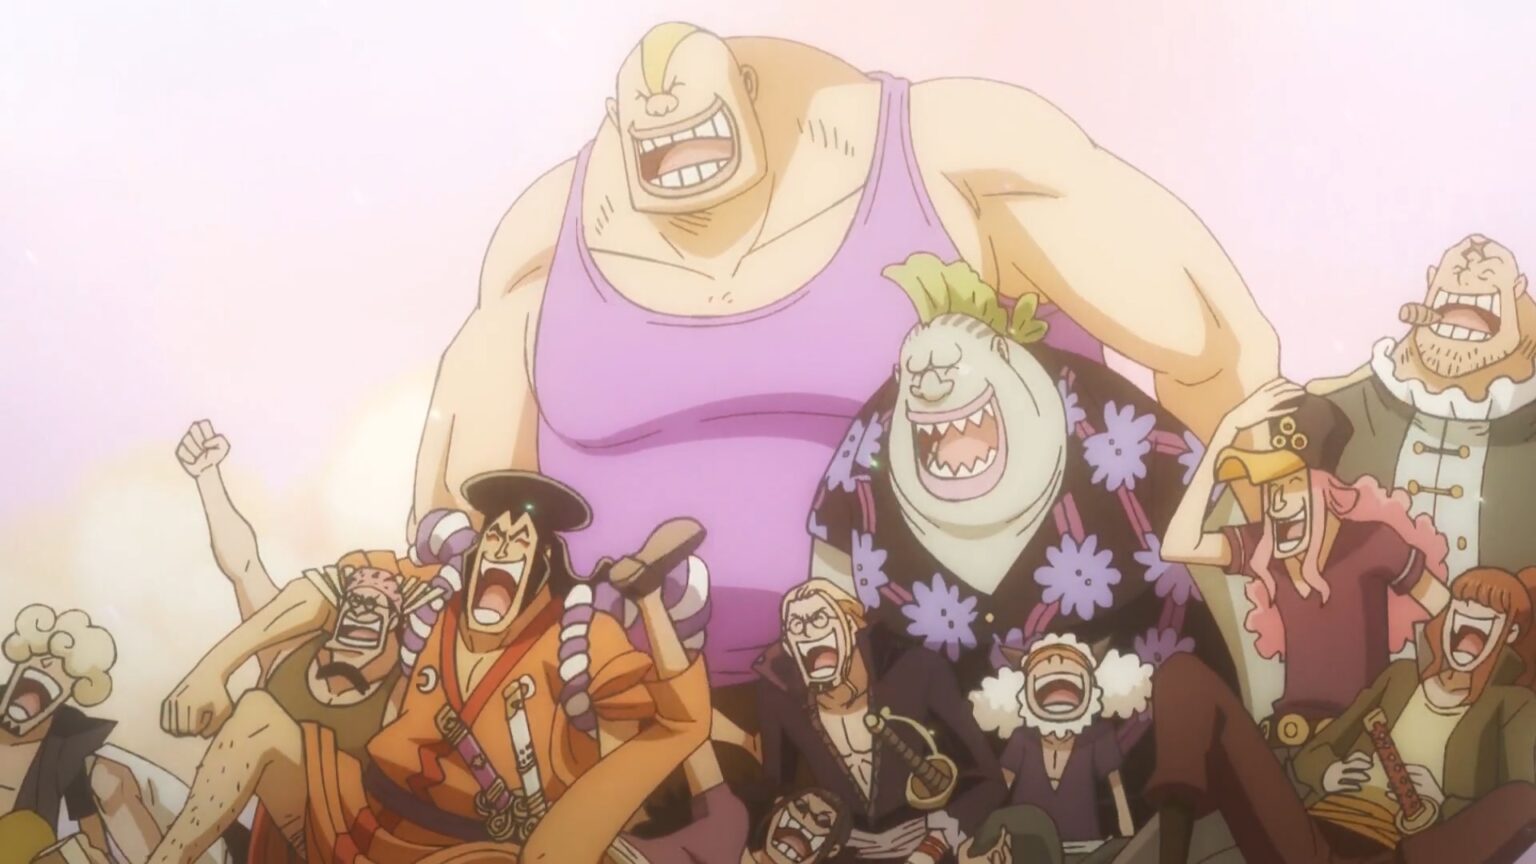 One Piece Roger Laughed a lot when they reached laughtale.